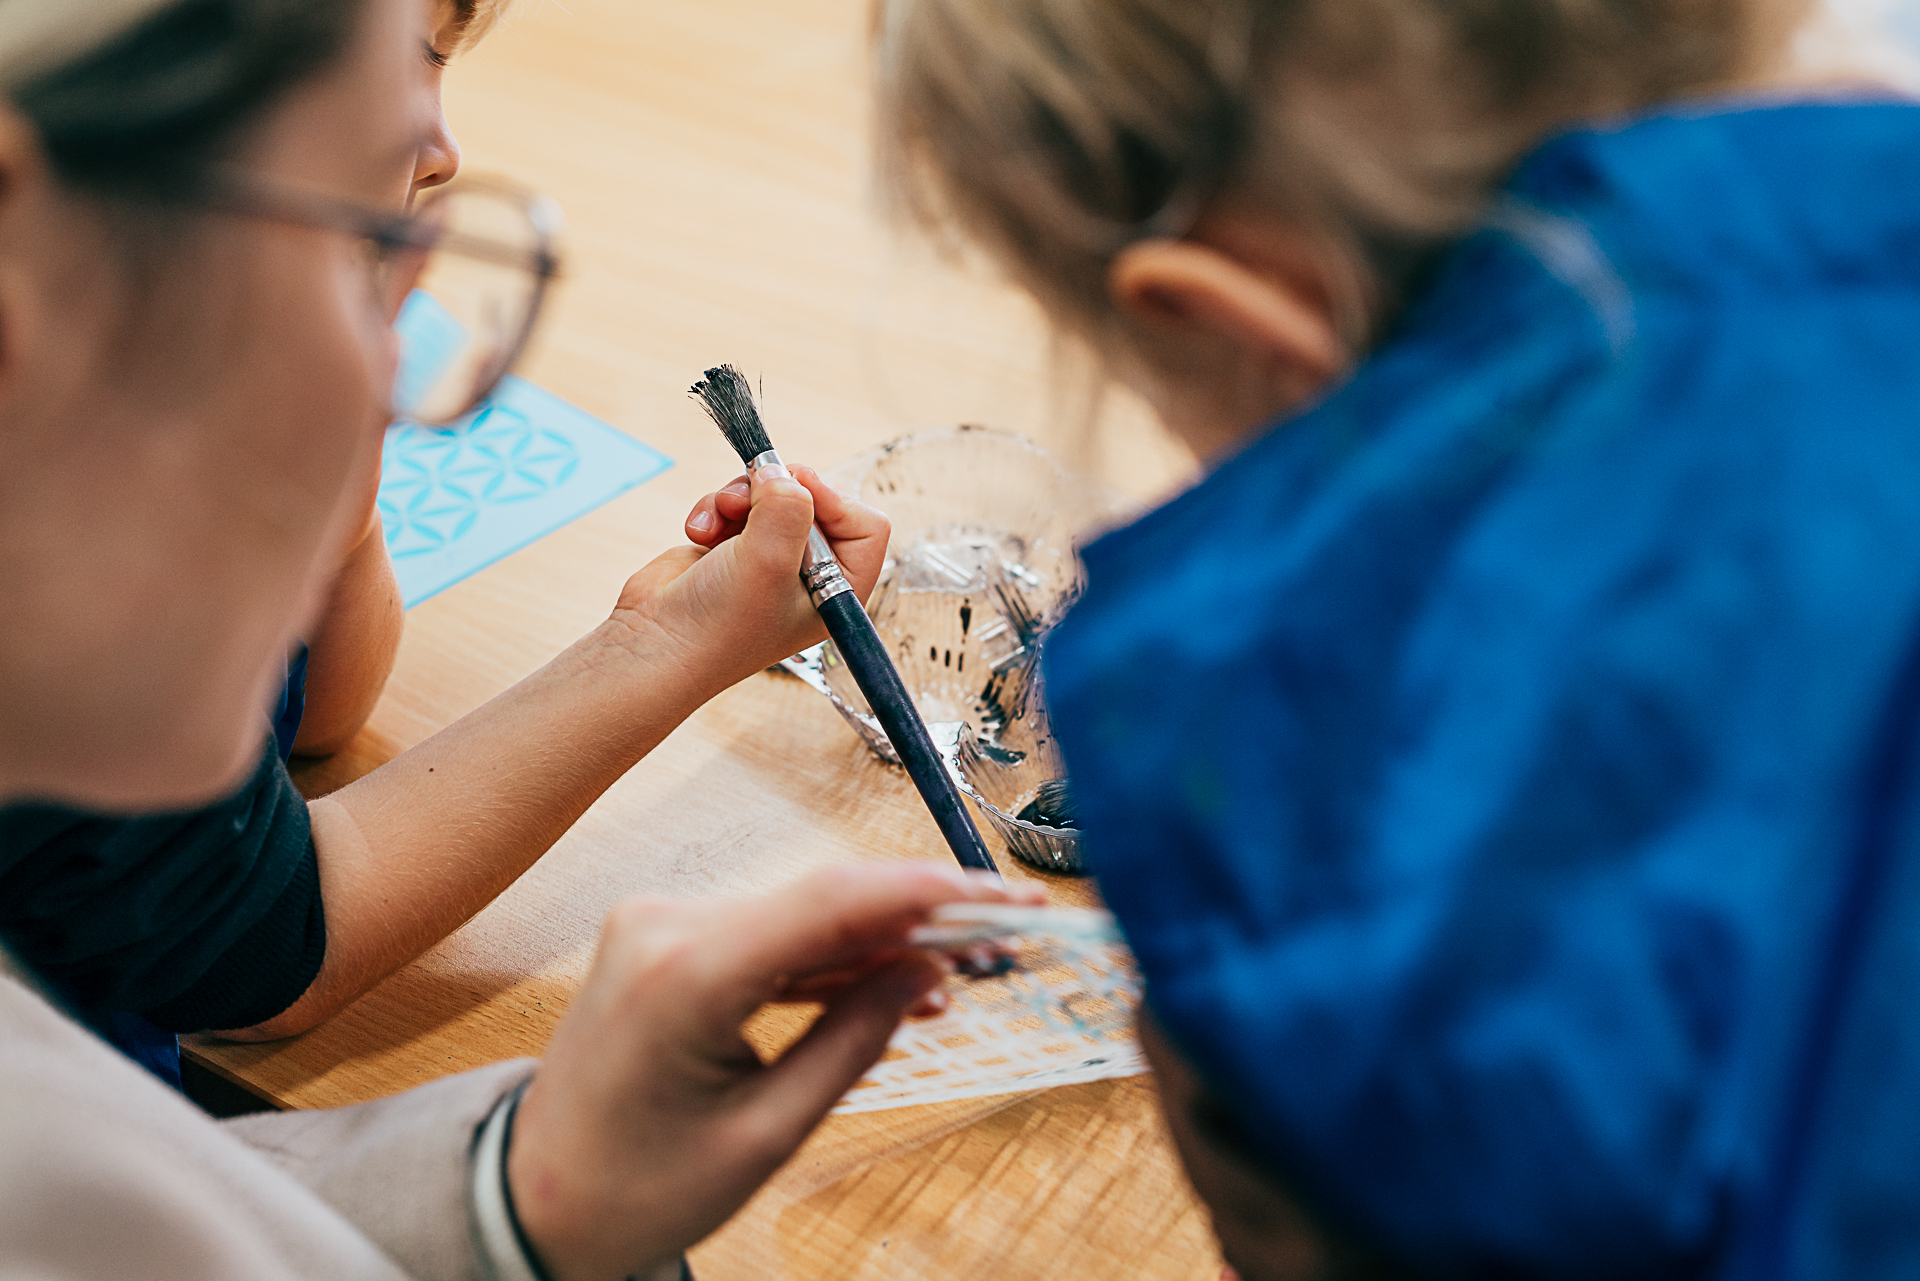 Explore Little Art Makers: an engaging weekly art workshop for children ages 3 to 5. Creative learning through storytime, artwork engagement and hands-on activities.